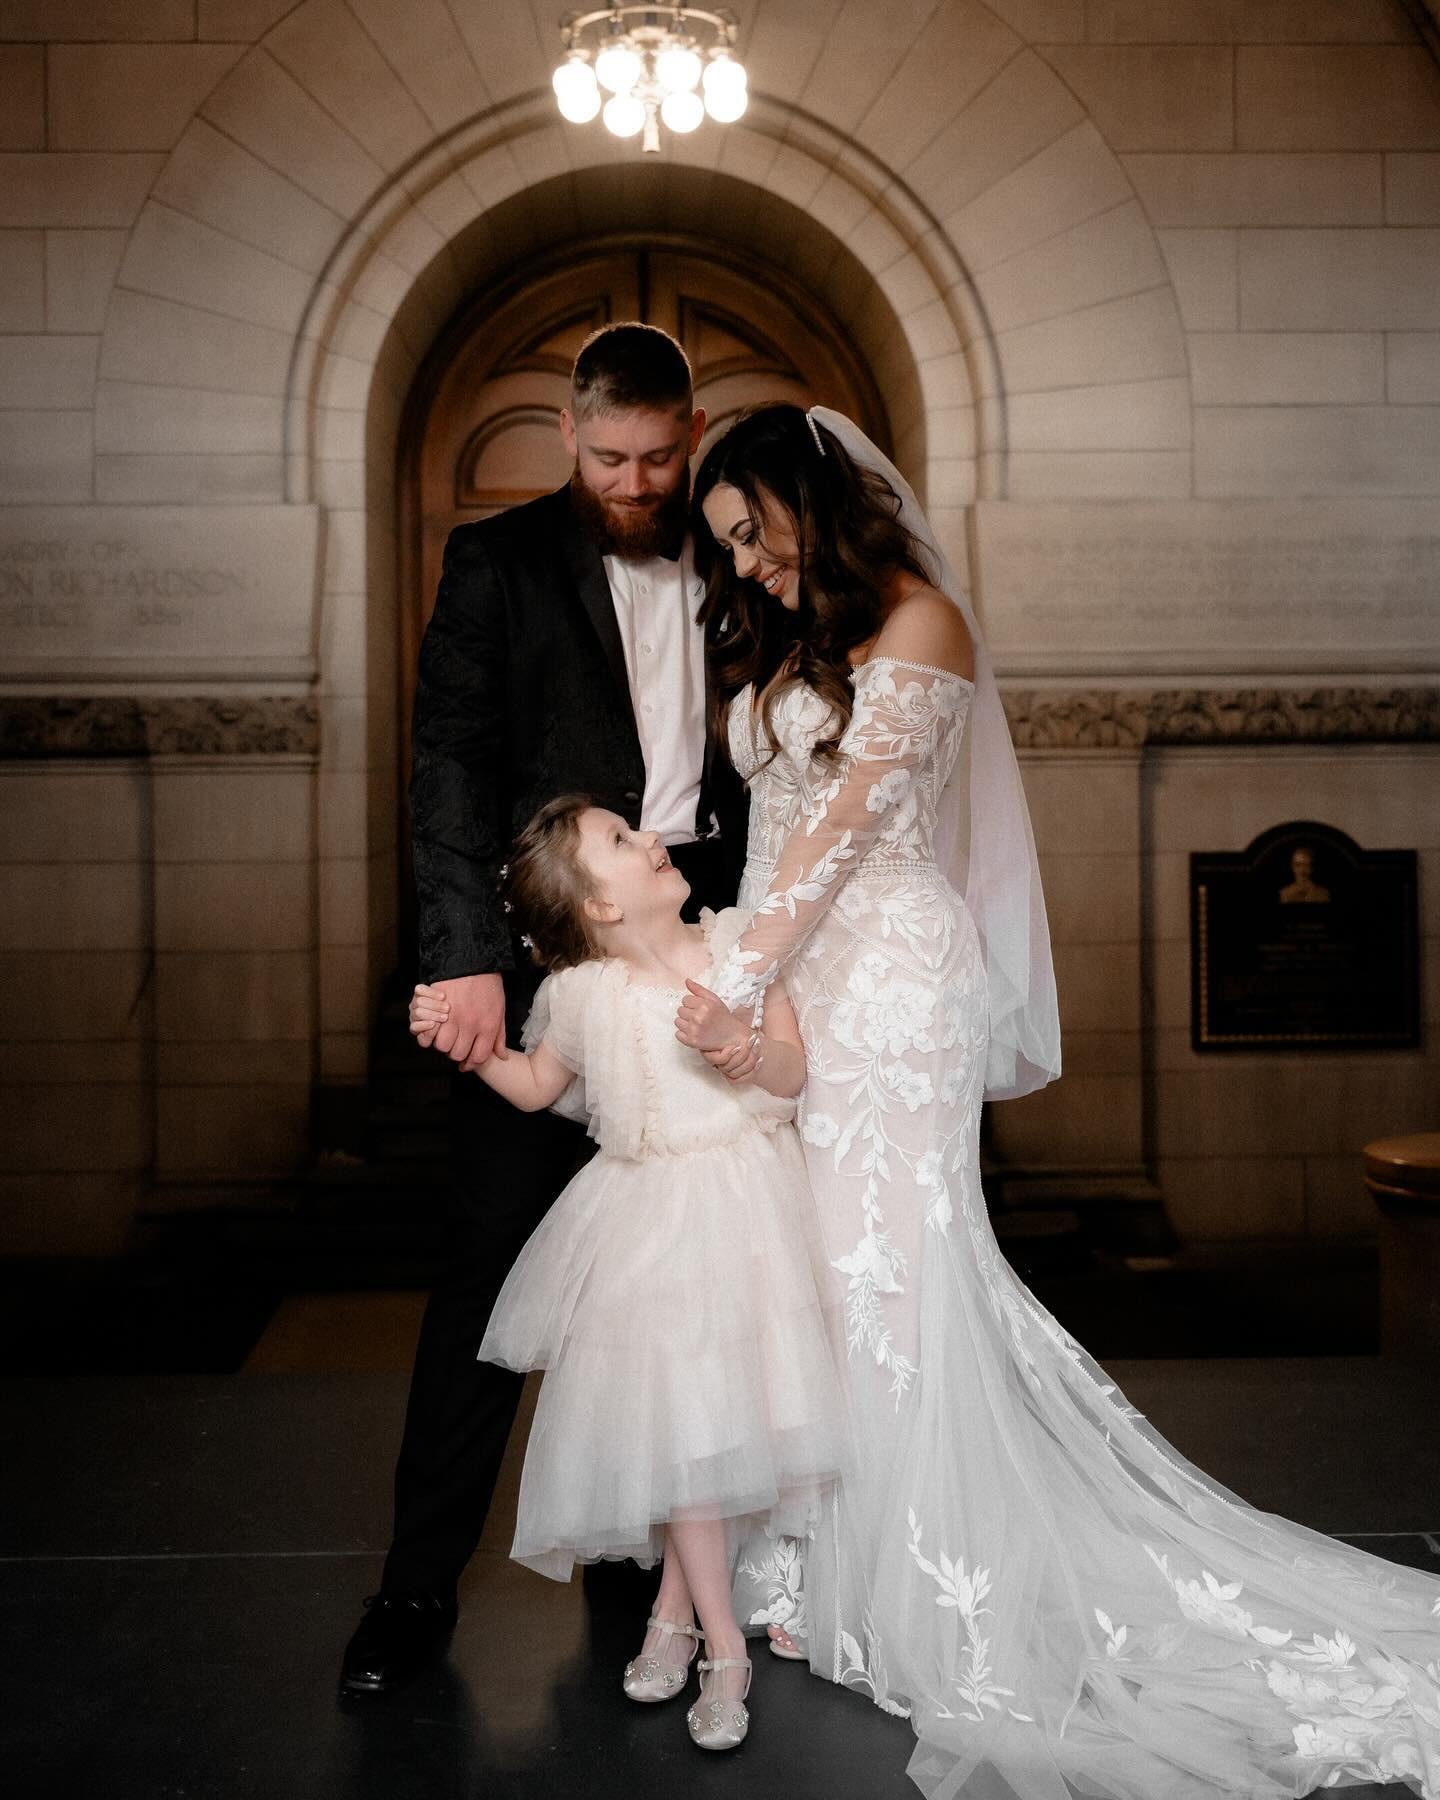 With Mother&rsquo;s Day coming up, what a perfect time to share these sweet images from Lucy + Preston&rsquo;s day with their adorable daughter ❤️ I loved how they included her to create such beautiful moments. 

@alleghenycountyvenues
@asimplevow
@l